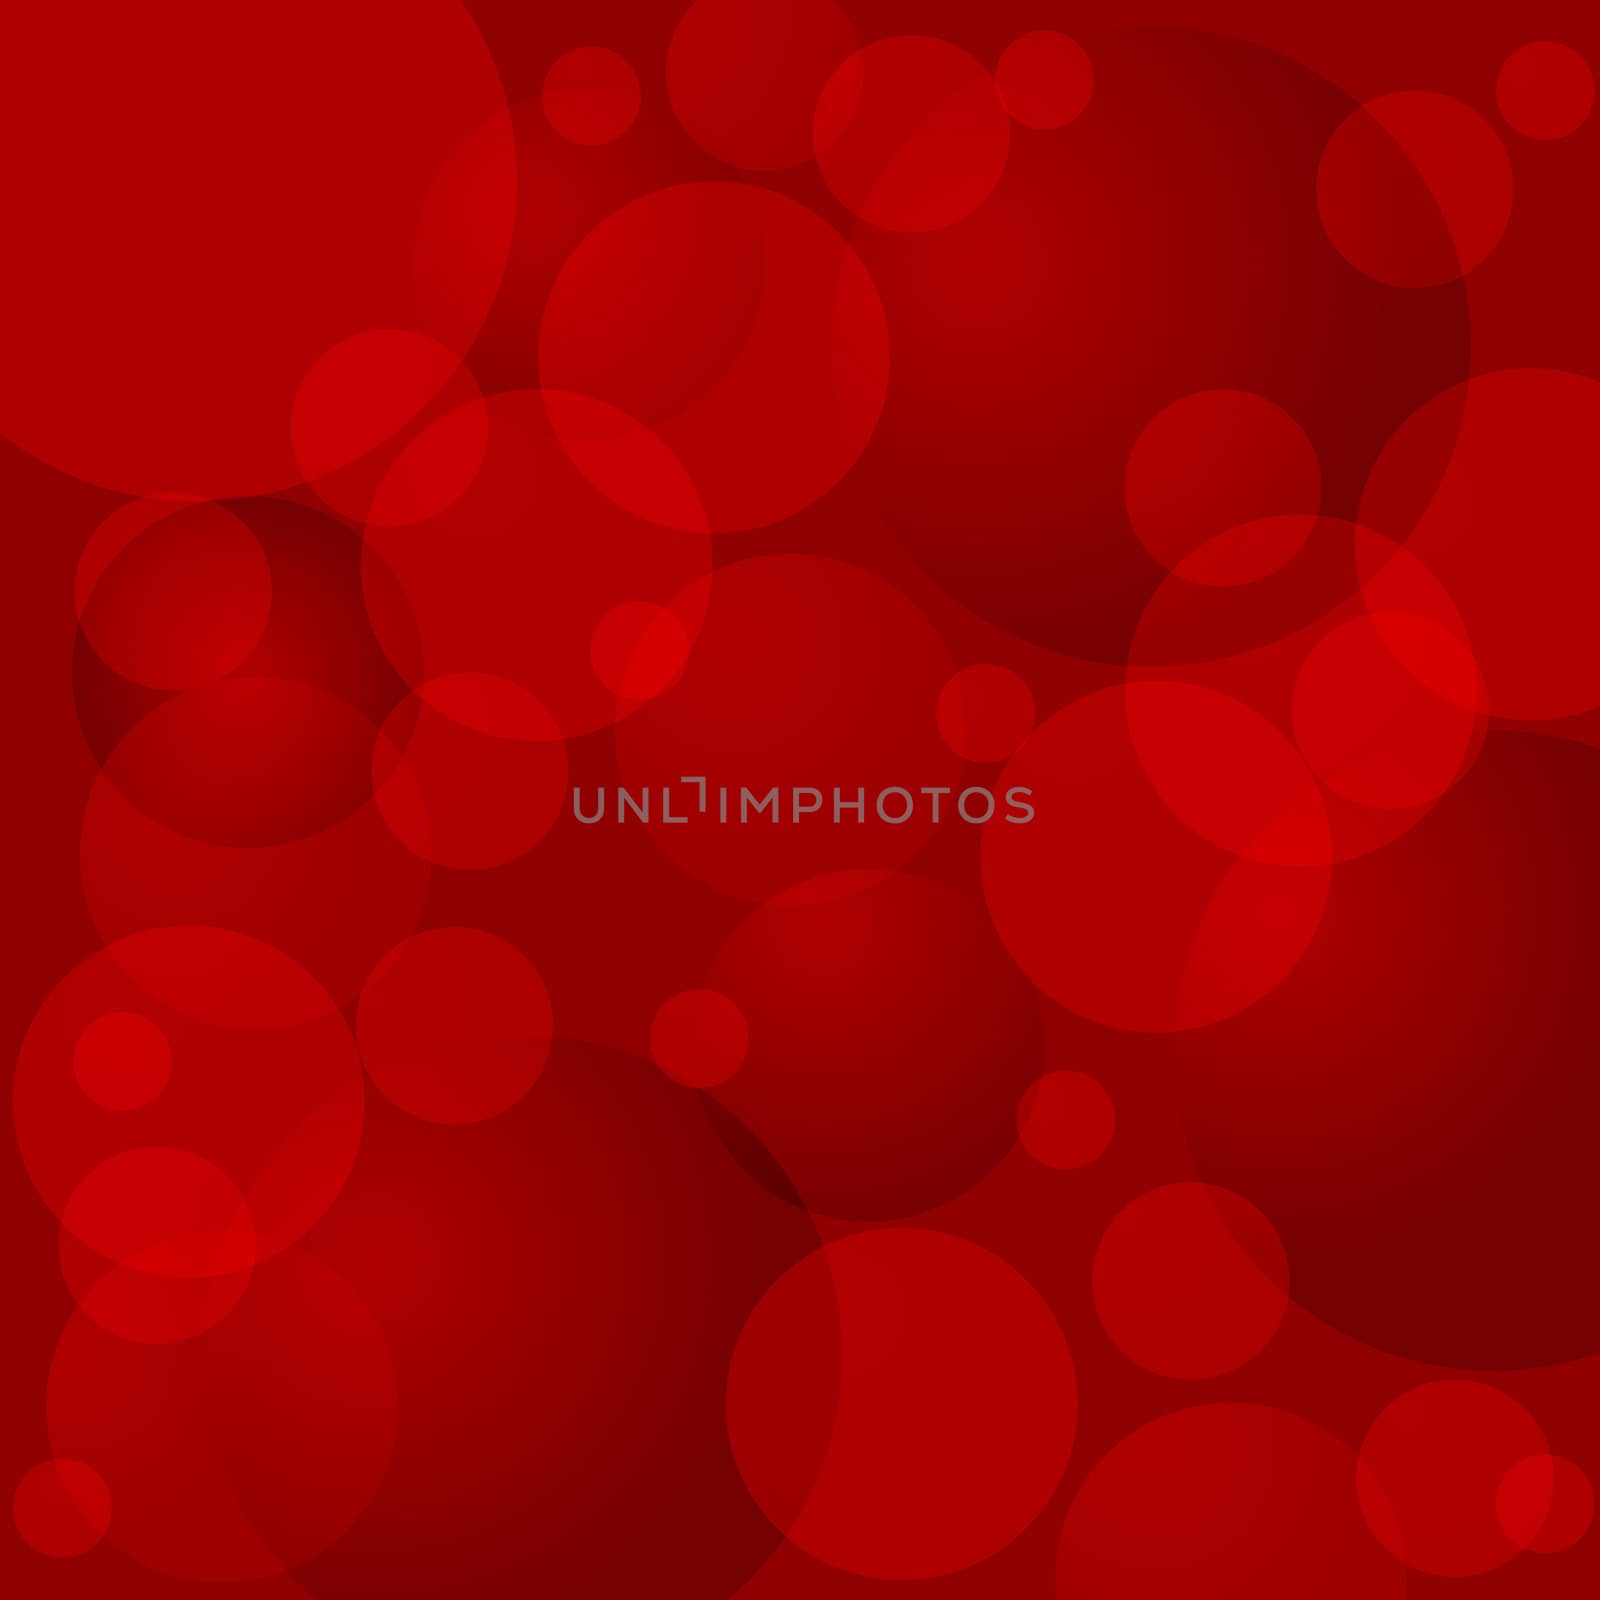 Background with red circles